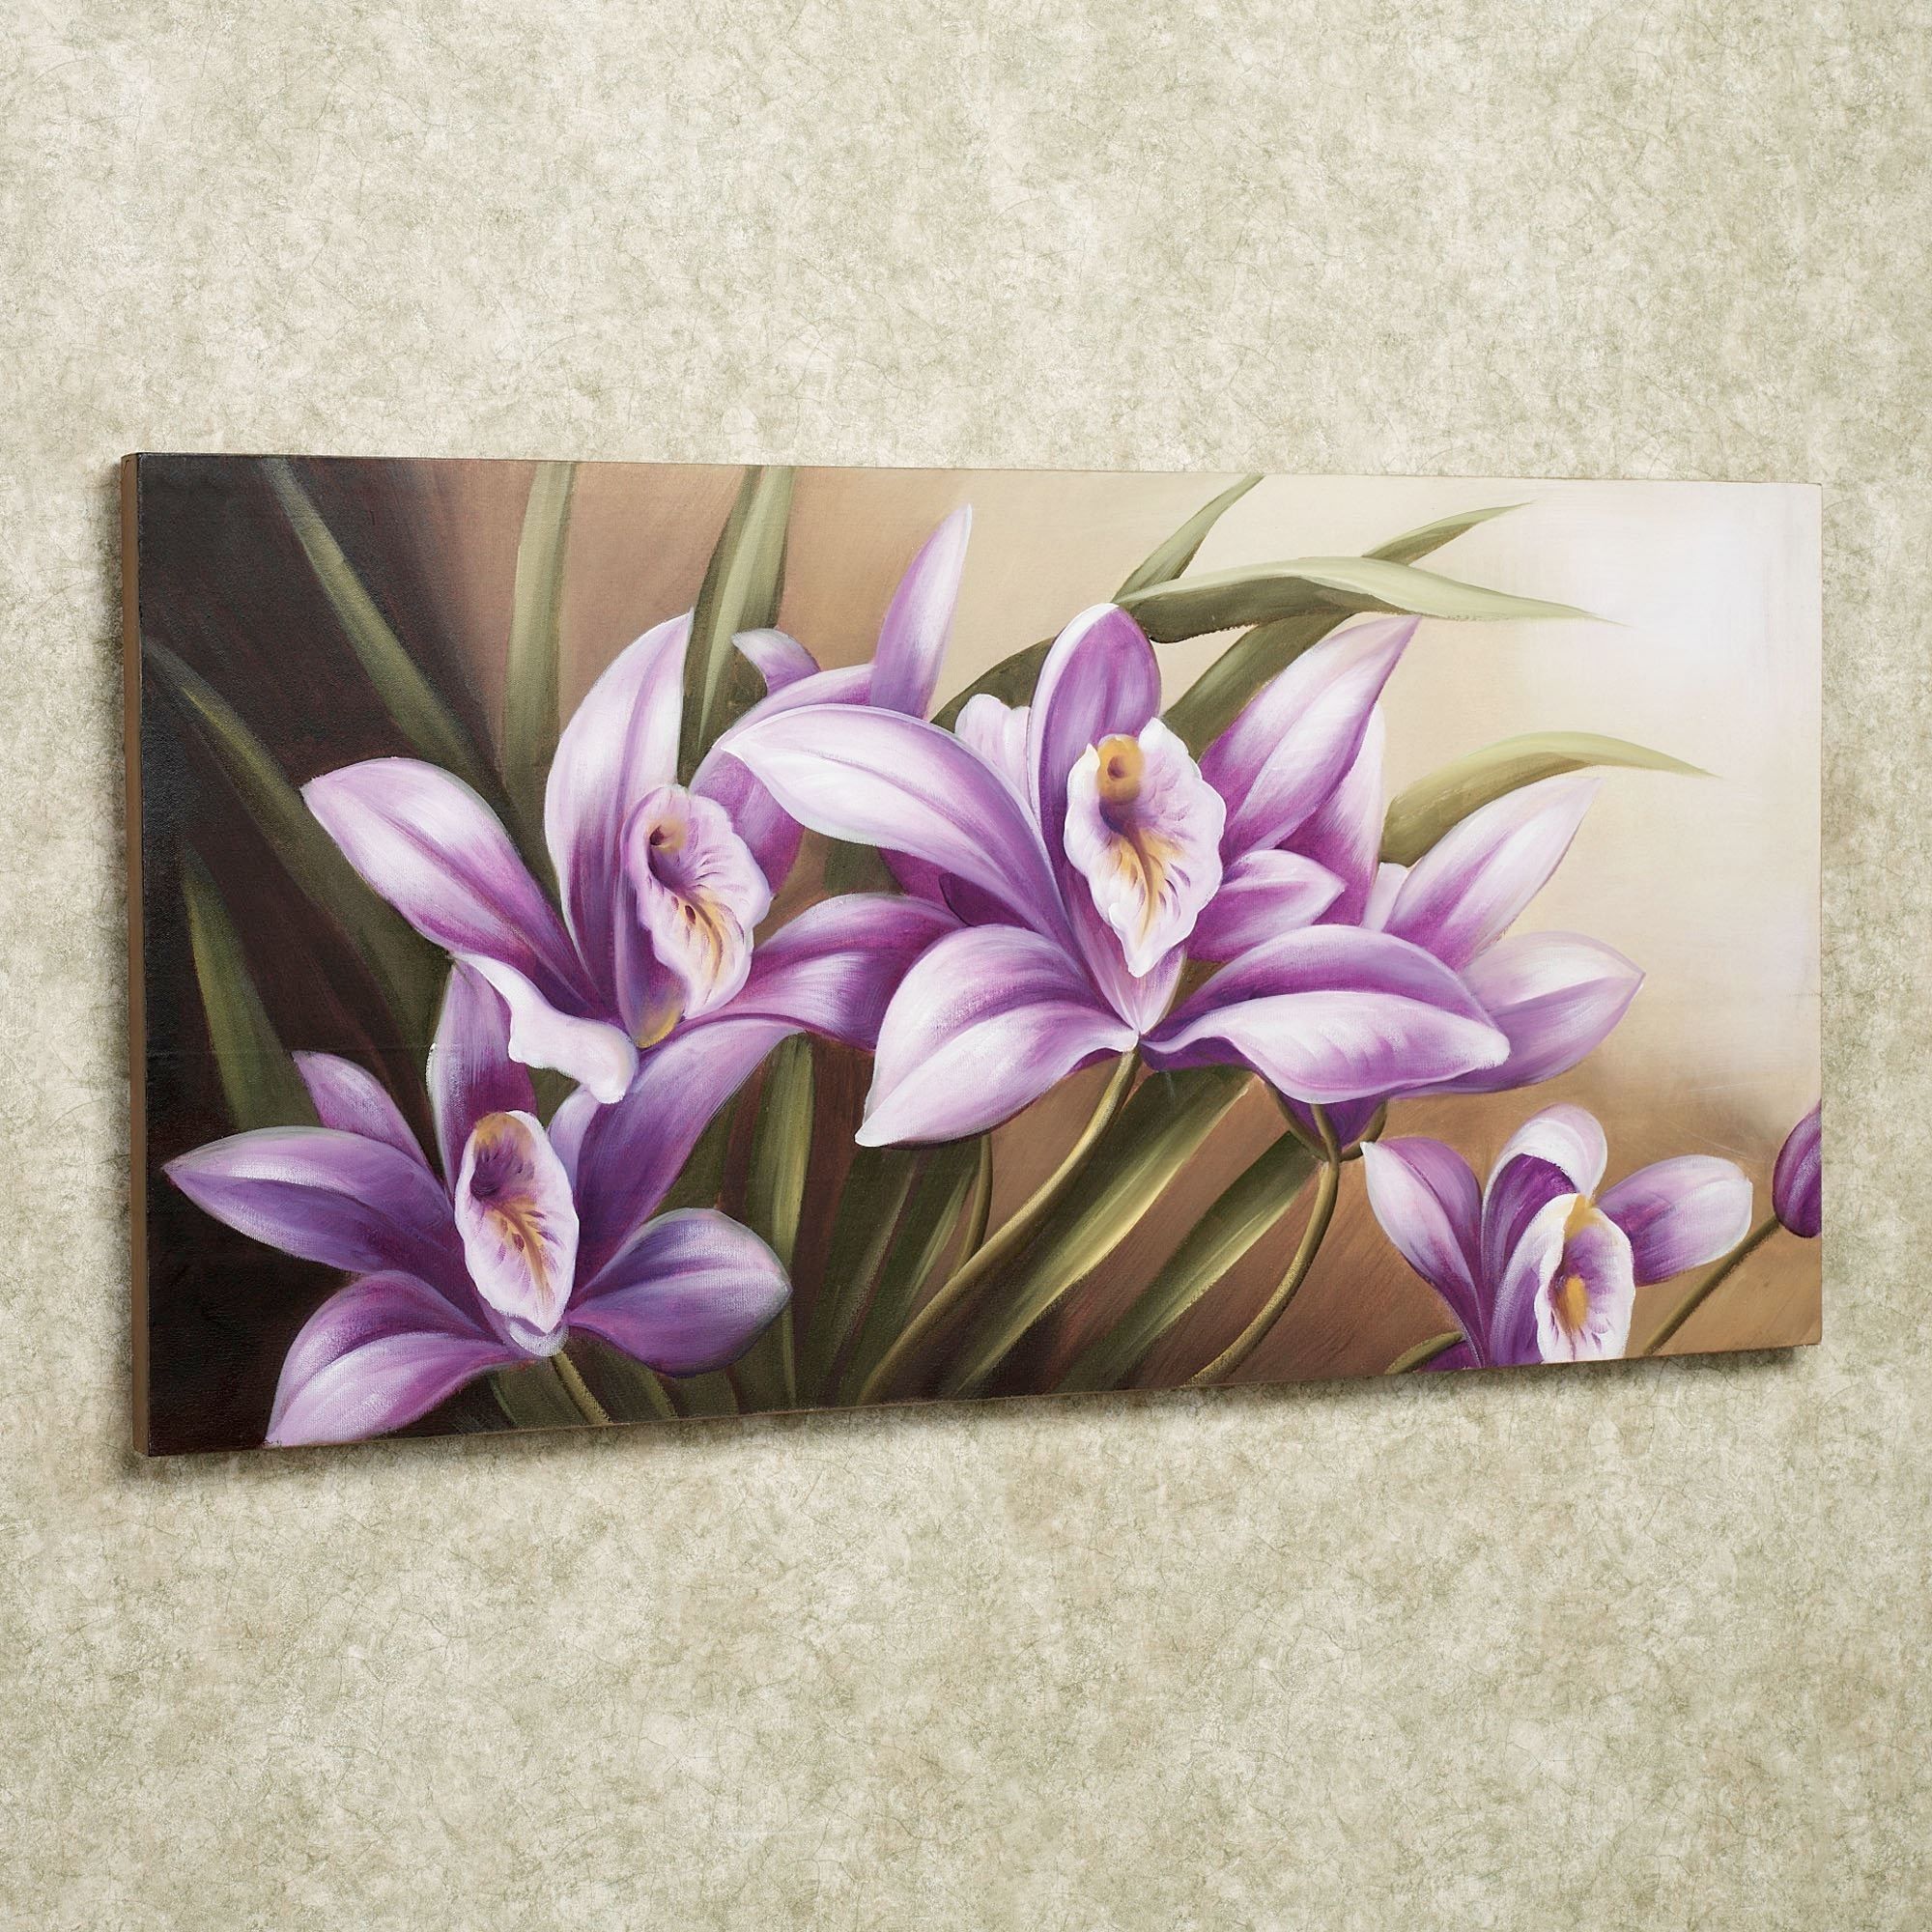 Wild Orchid Handpainted Floral Canvas Wall Art With Regard To Floral Wall Art (View 9 of 20)